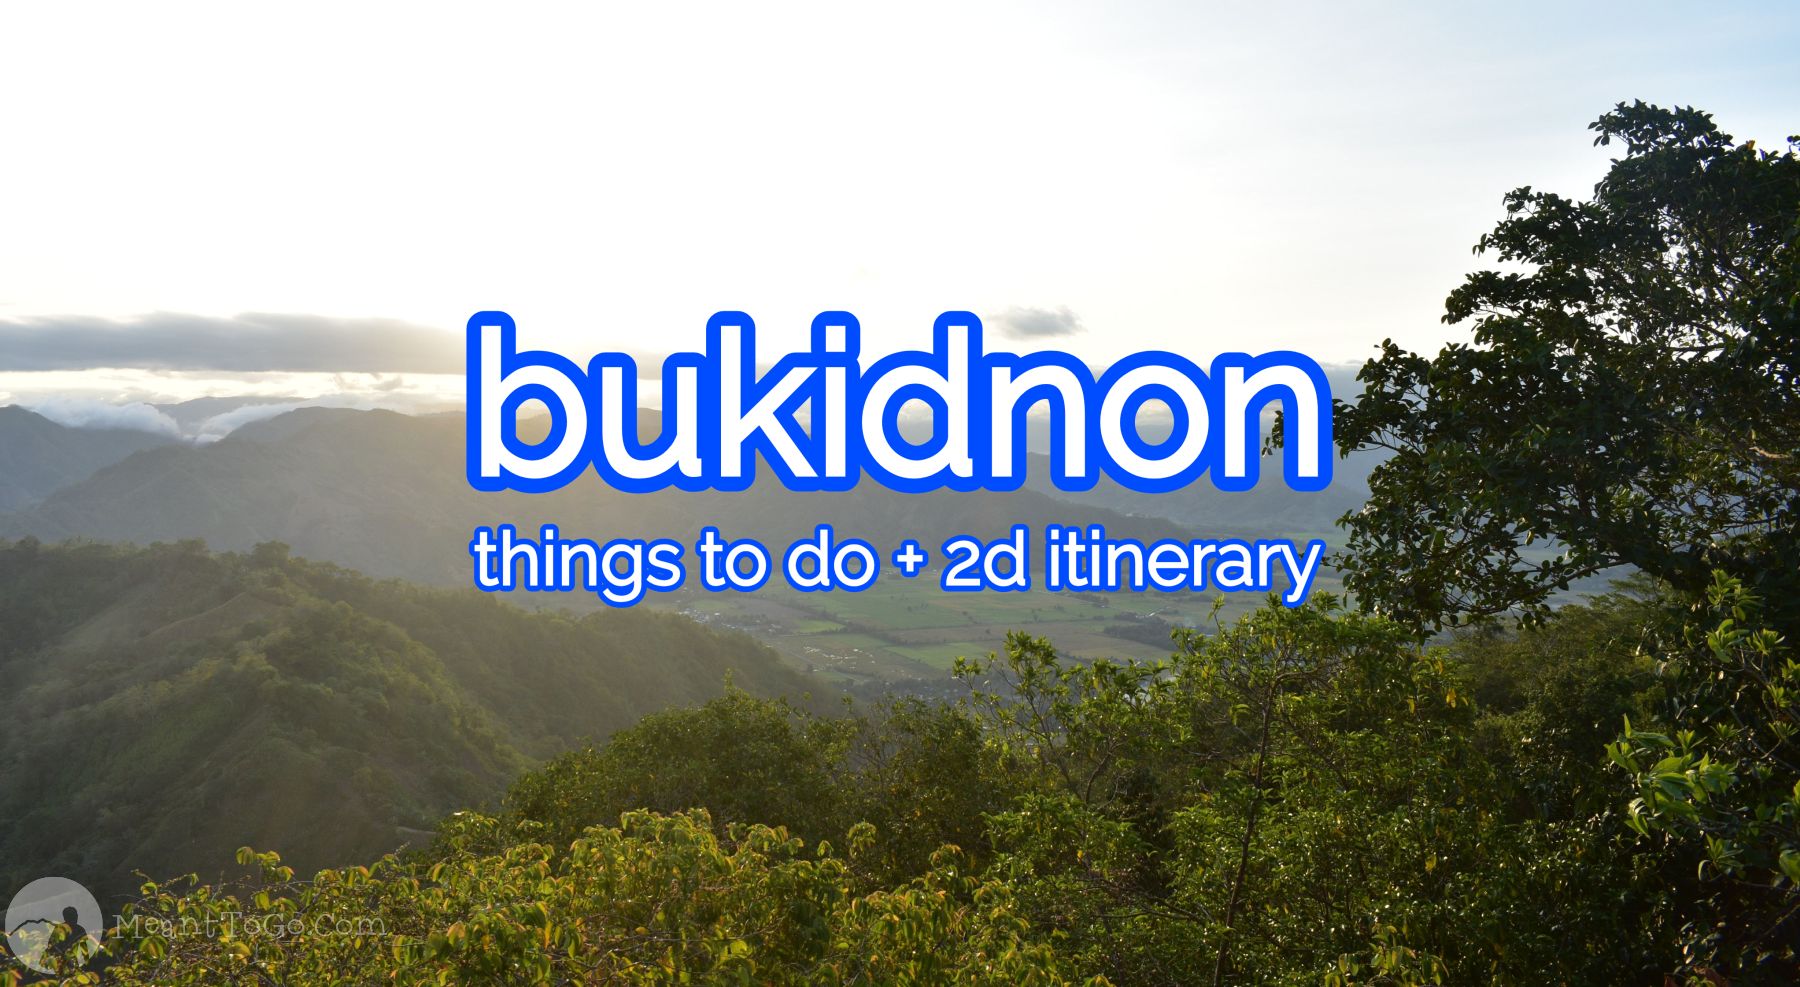 Bukidnon Travel Guide (DIY): Things To Do + Itinerary & Budget